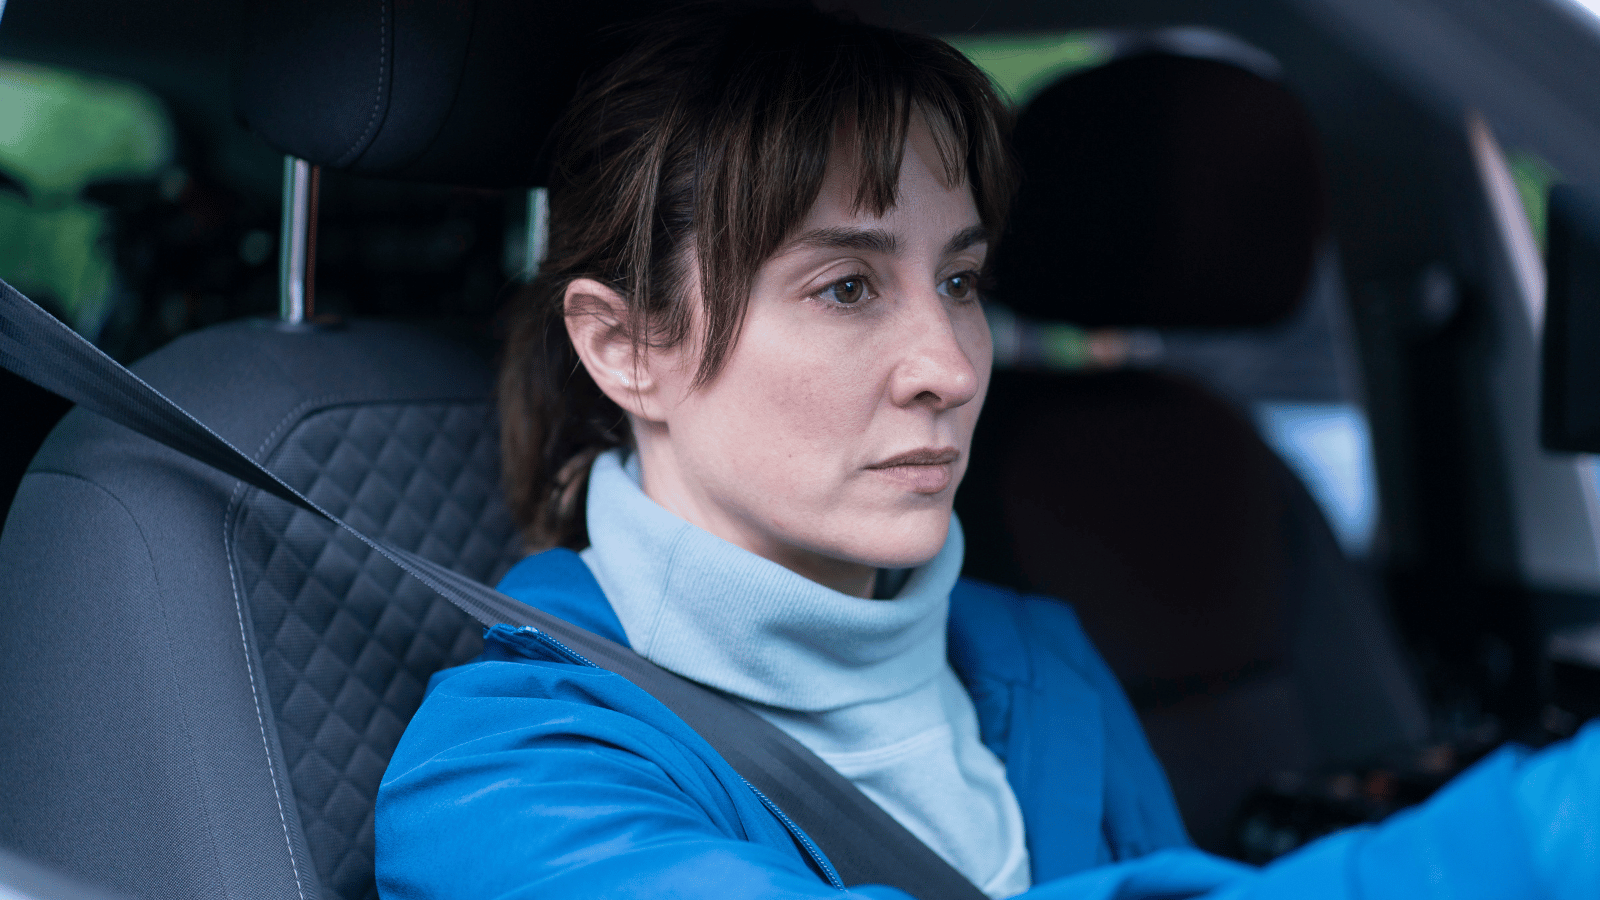 Morven Christie in Payback. Middle aged women with dark hair tied in a pony tail driving a car.